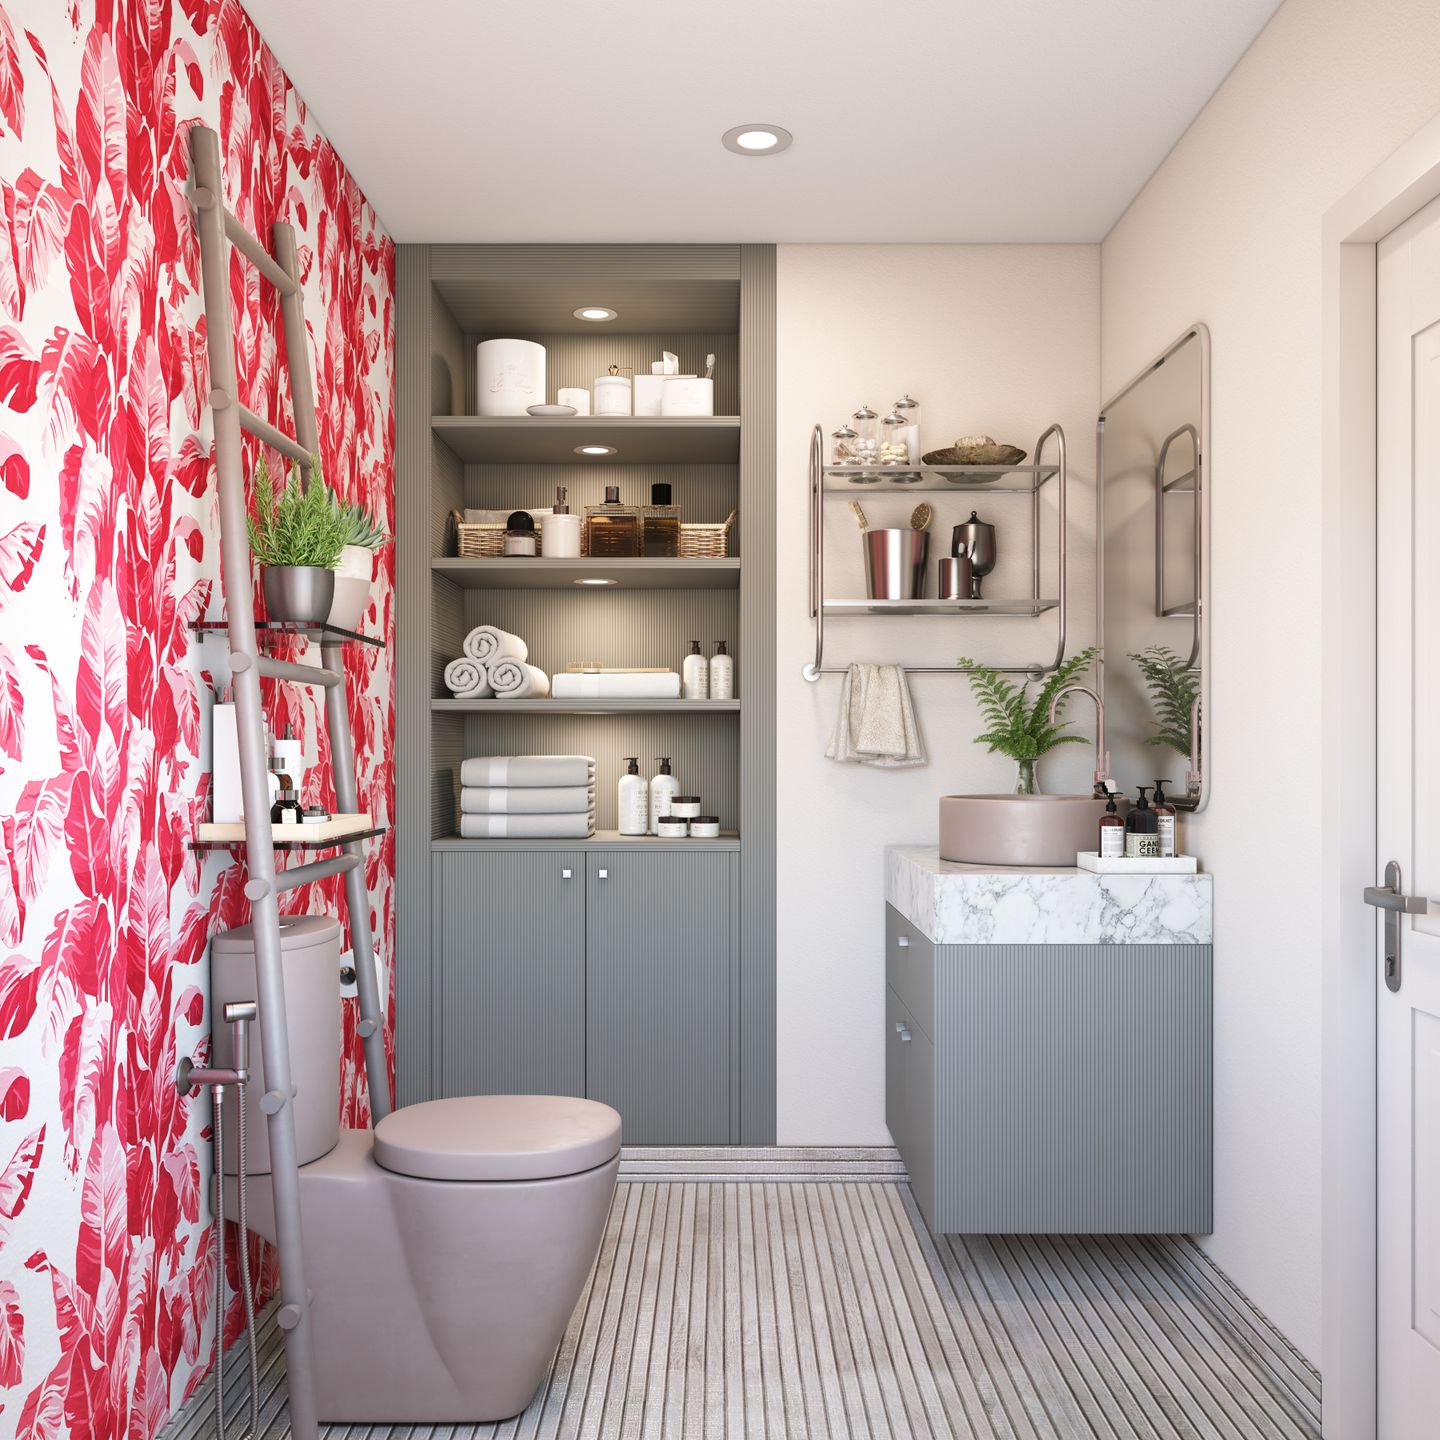 Toilet Design with Red Floral Wallpaper - Livspace